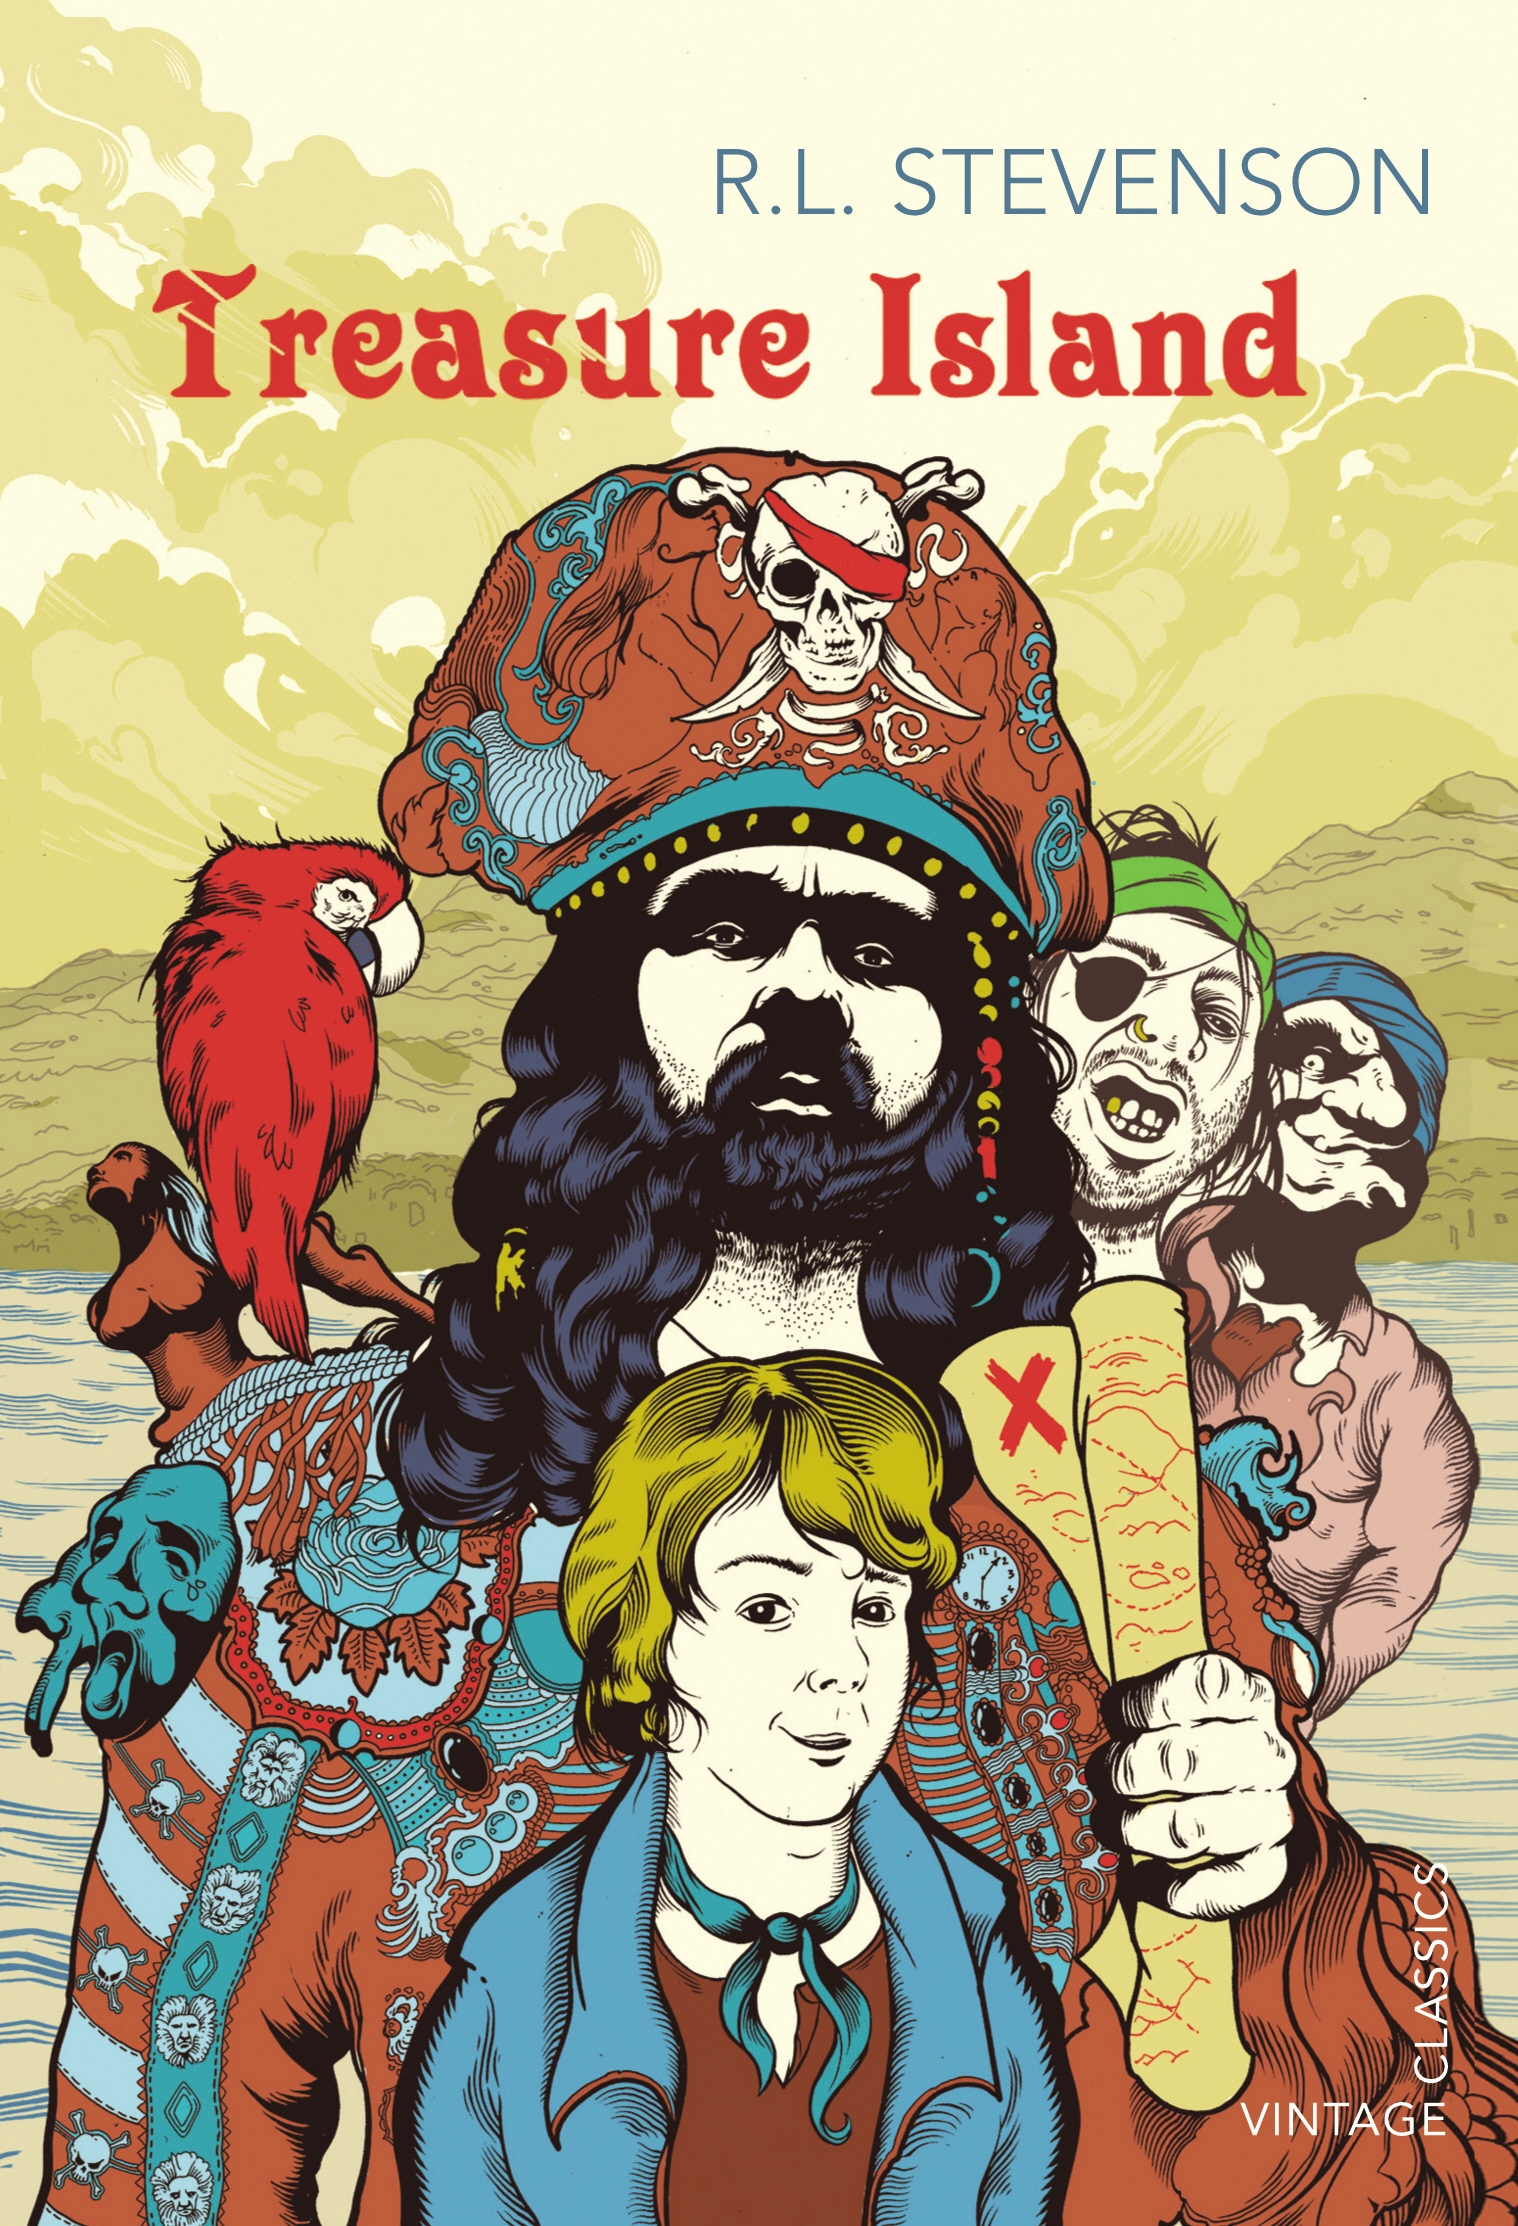 book review of the treasure island